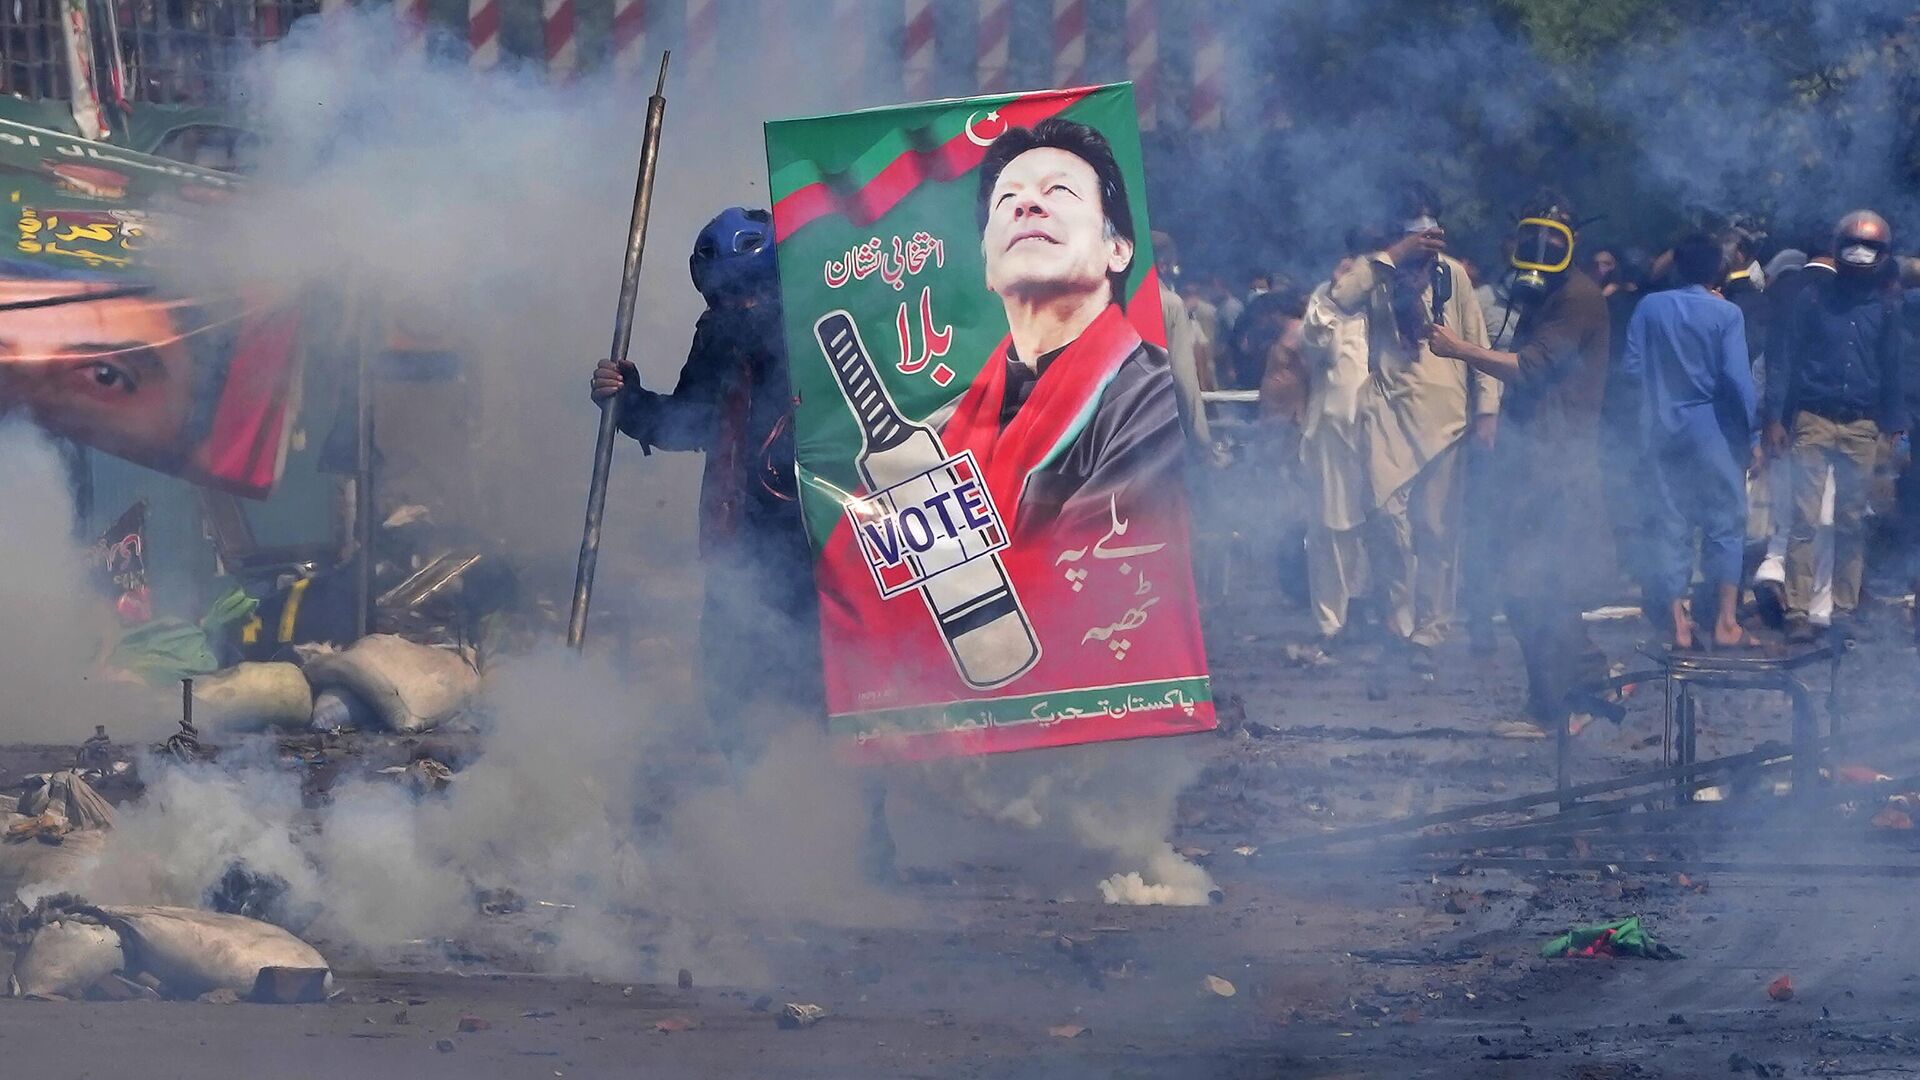 Supporters of former Prime Minister Imran Khan take cover after riot police officers fire tear gas to disperse them during clashes in Lahore, Pakistan, Wednesday, March 15, 2023. - Sputnik India, 1920, 15.03.2023